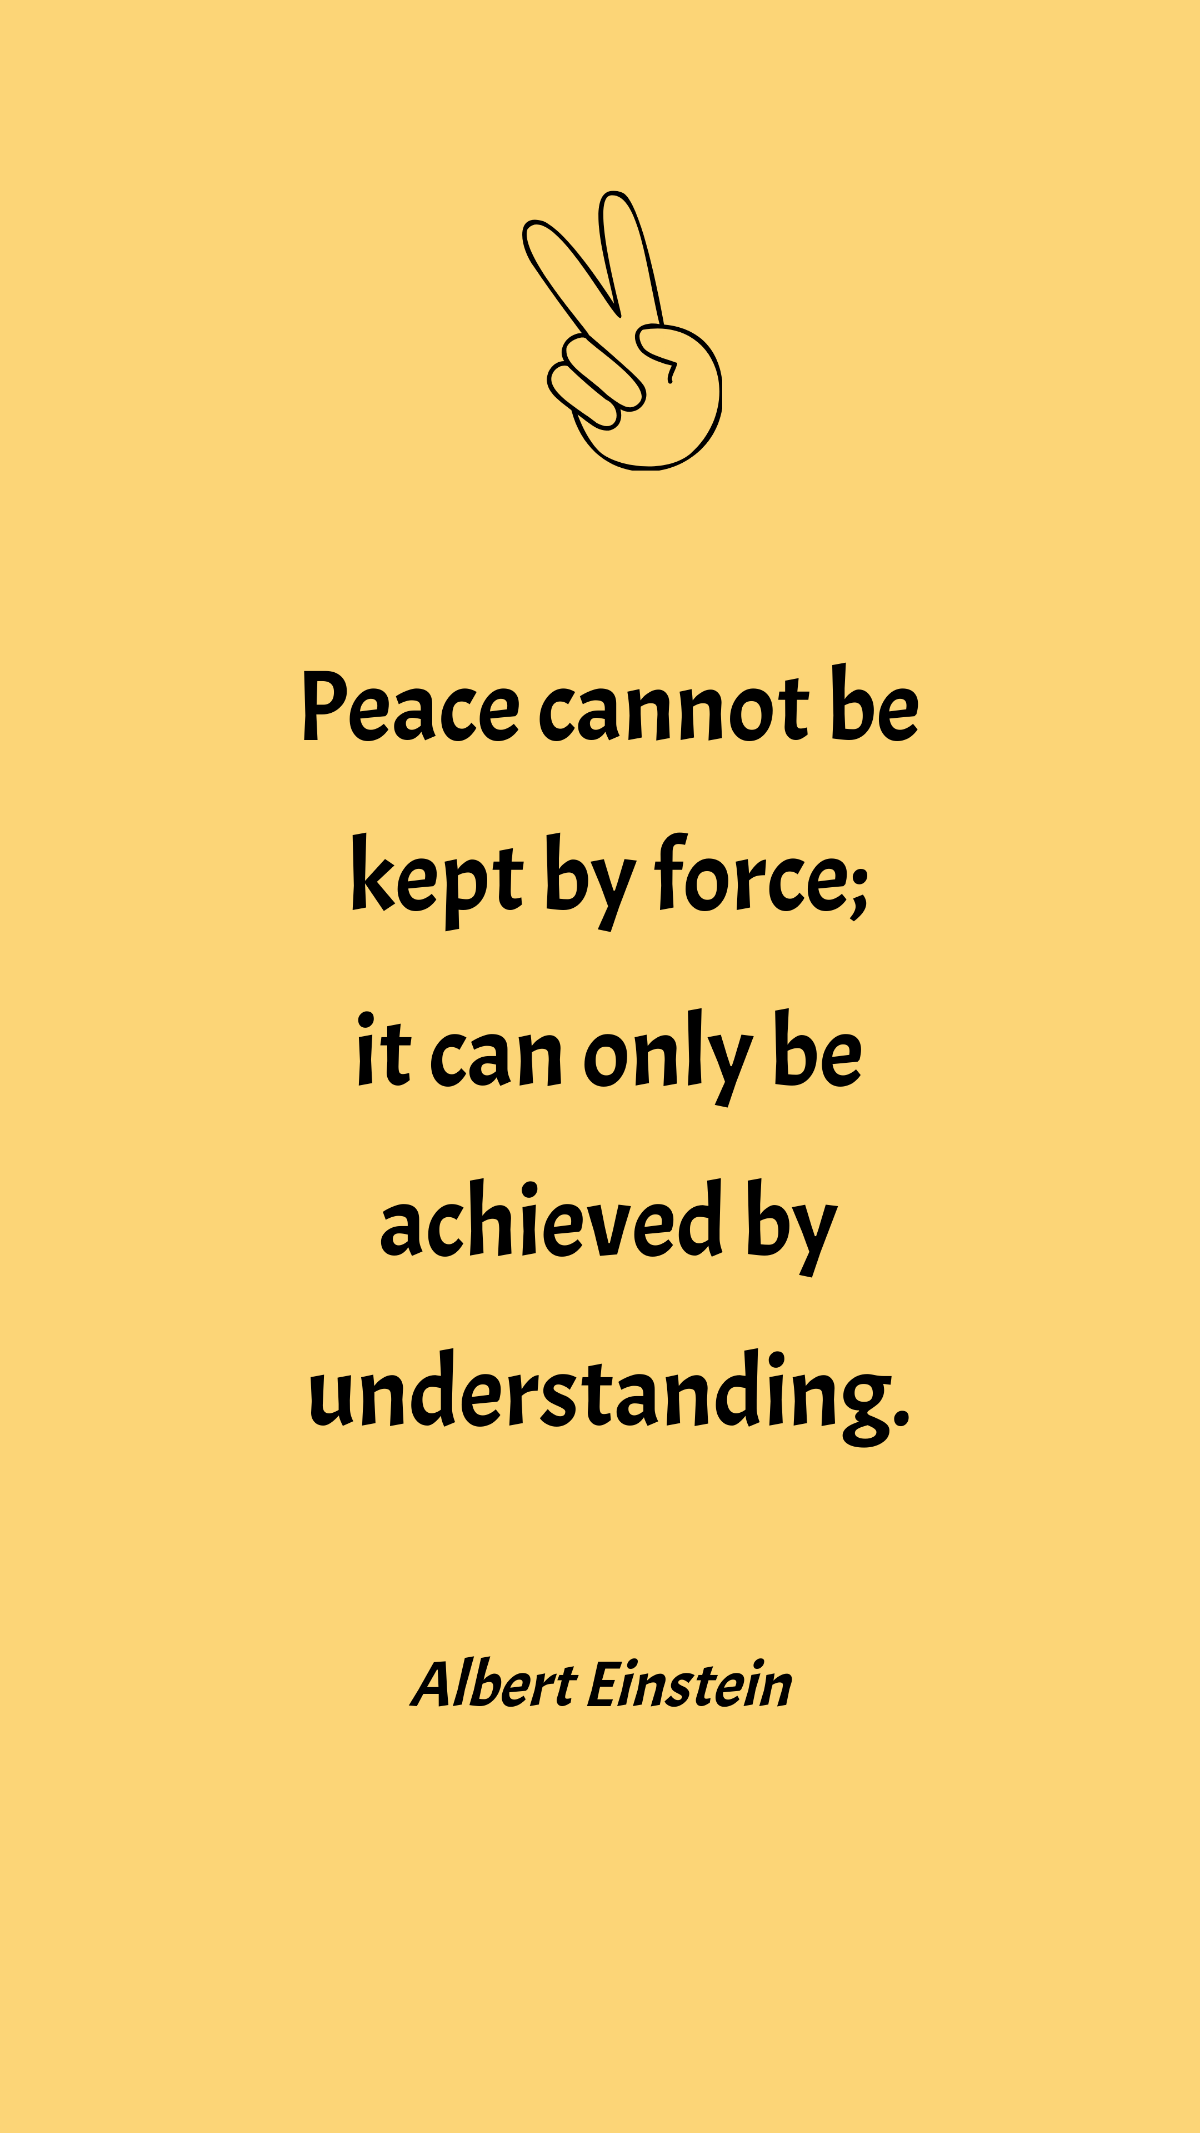 Albert Einstein - Peace cannot be kept by force; it can only be achieved by understanding.